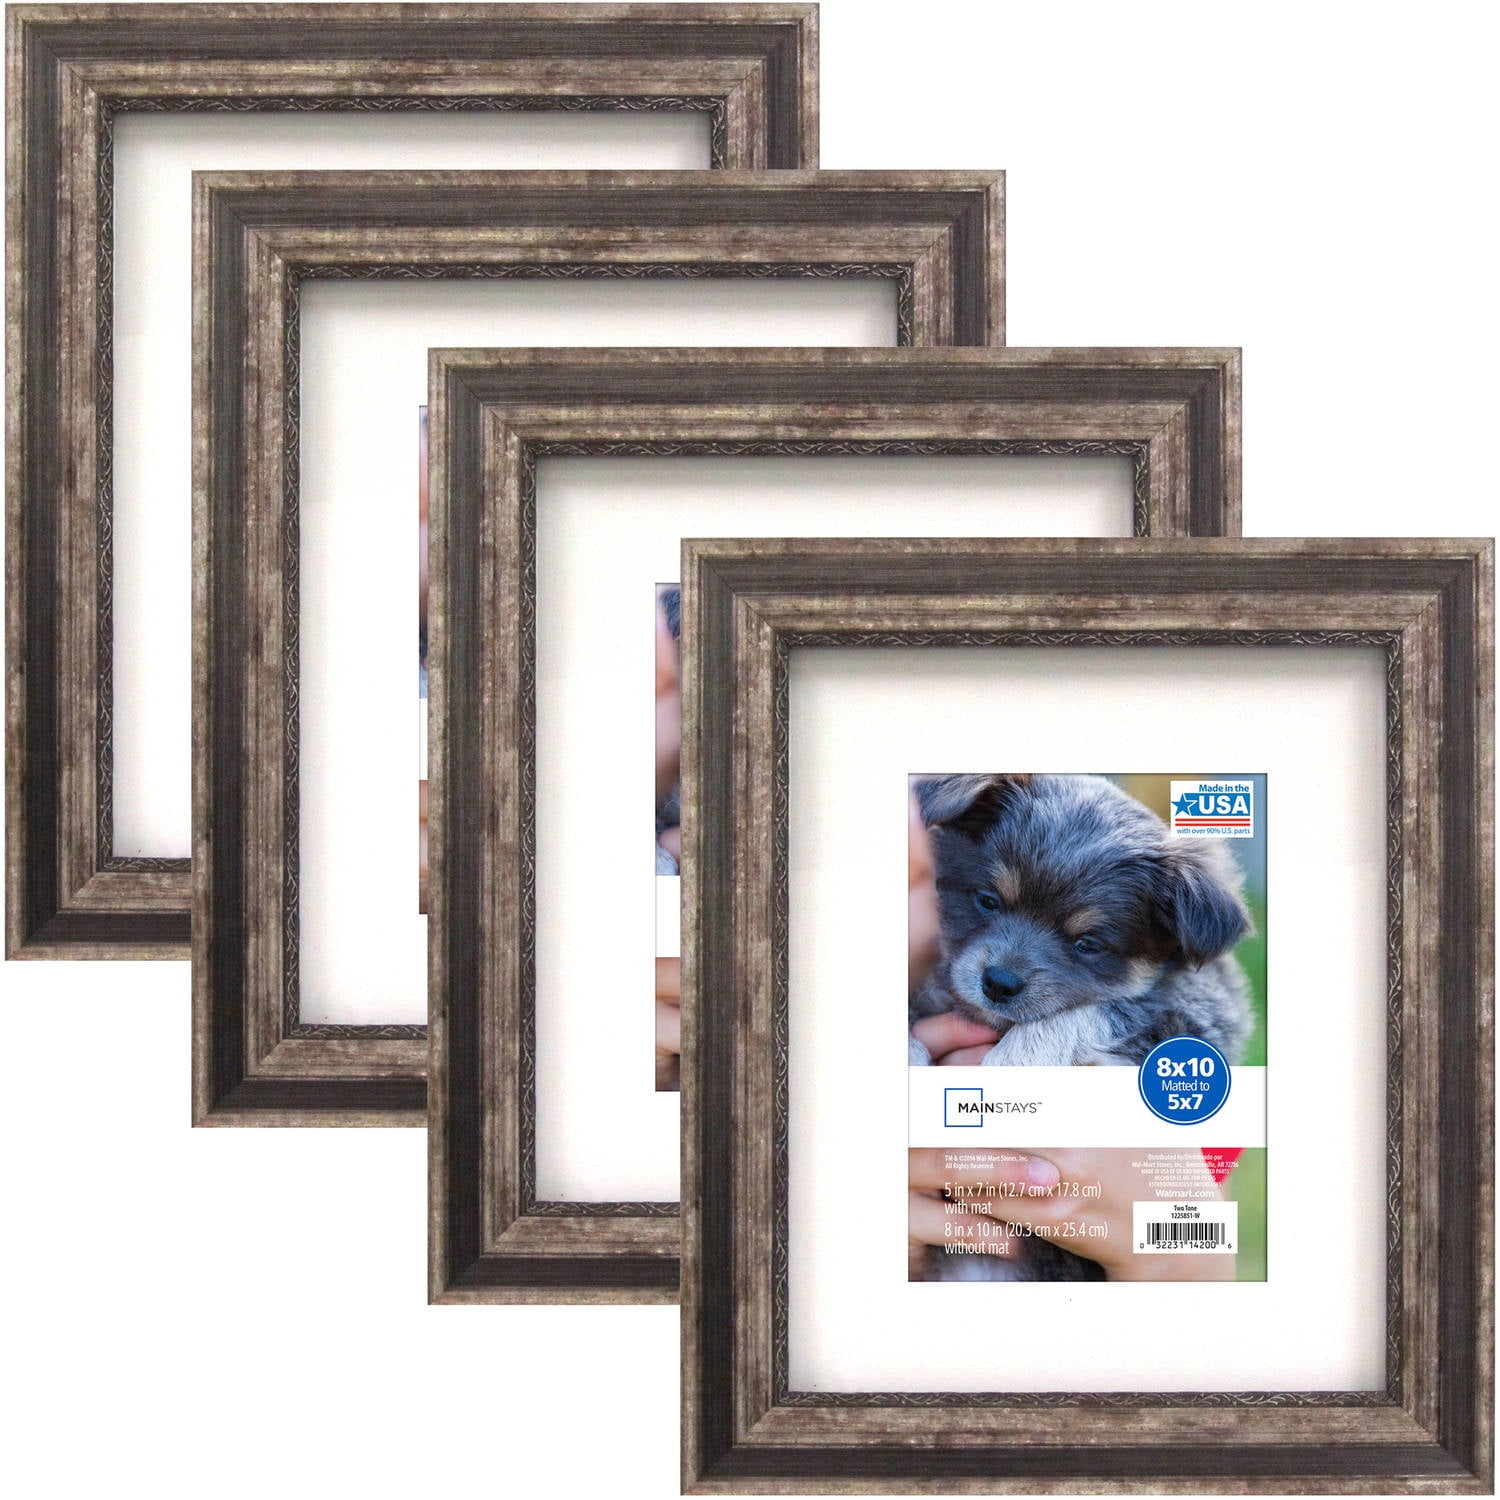 8x10 Picture Frame with Matboard - Holds Two 4x6 Images